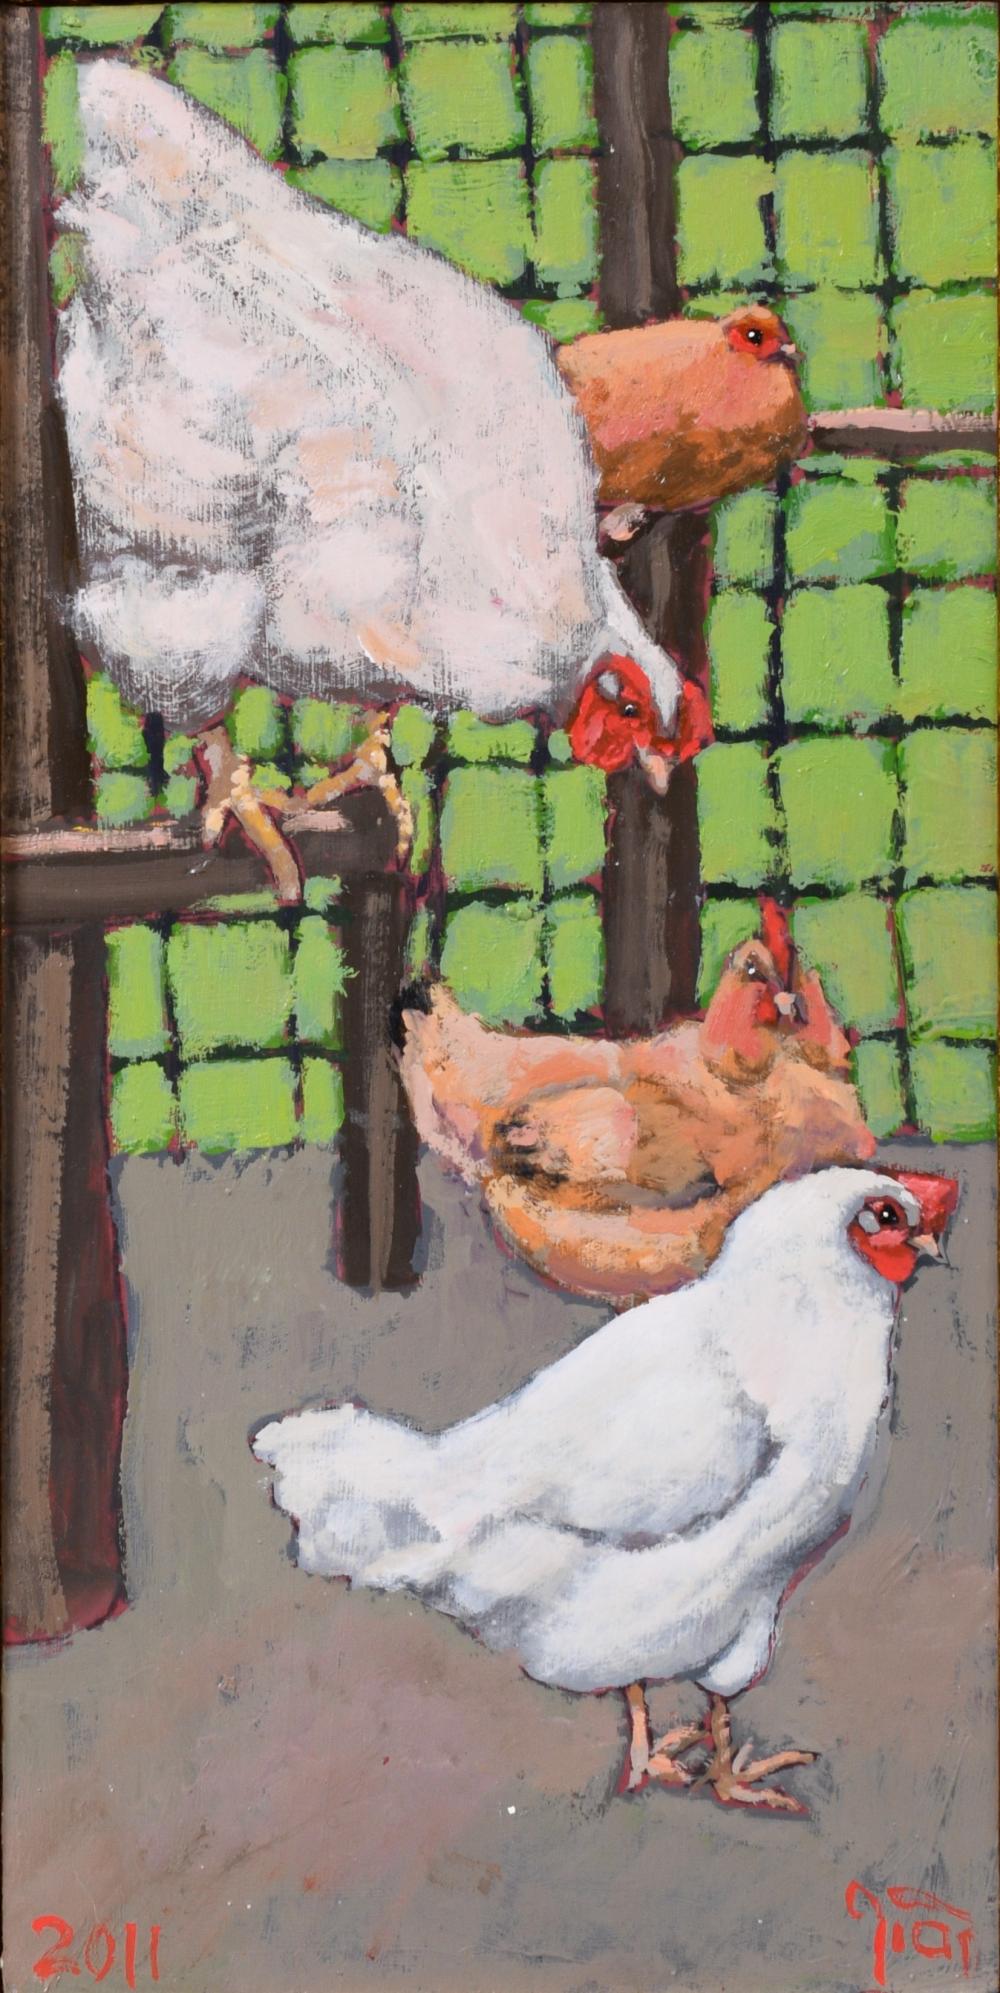 PAINTING OF CHICKENSPAINTING OF CHICKENS,